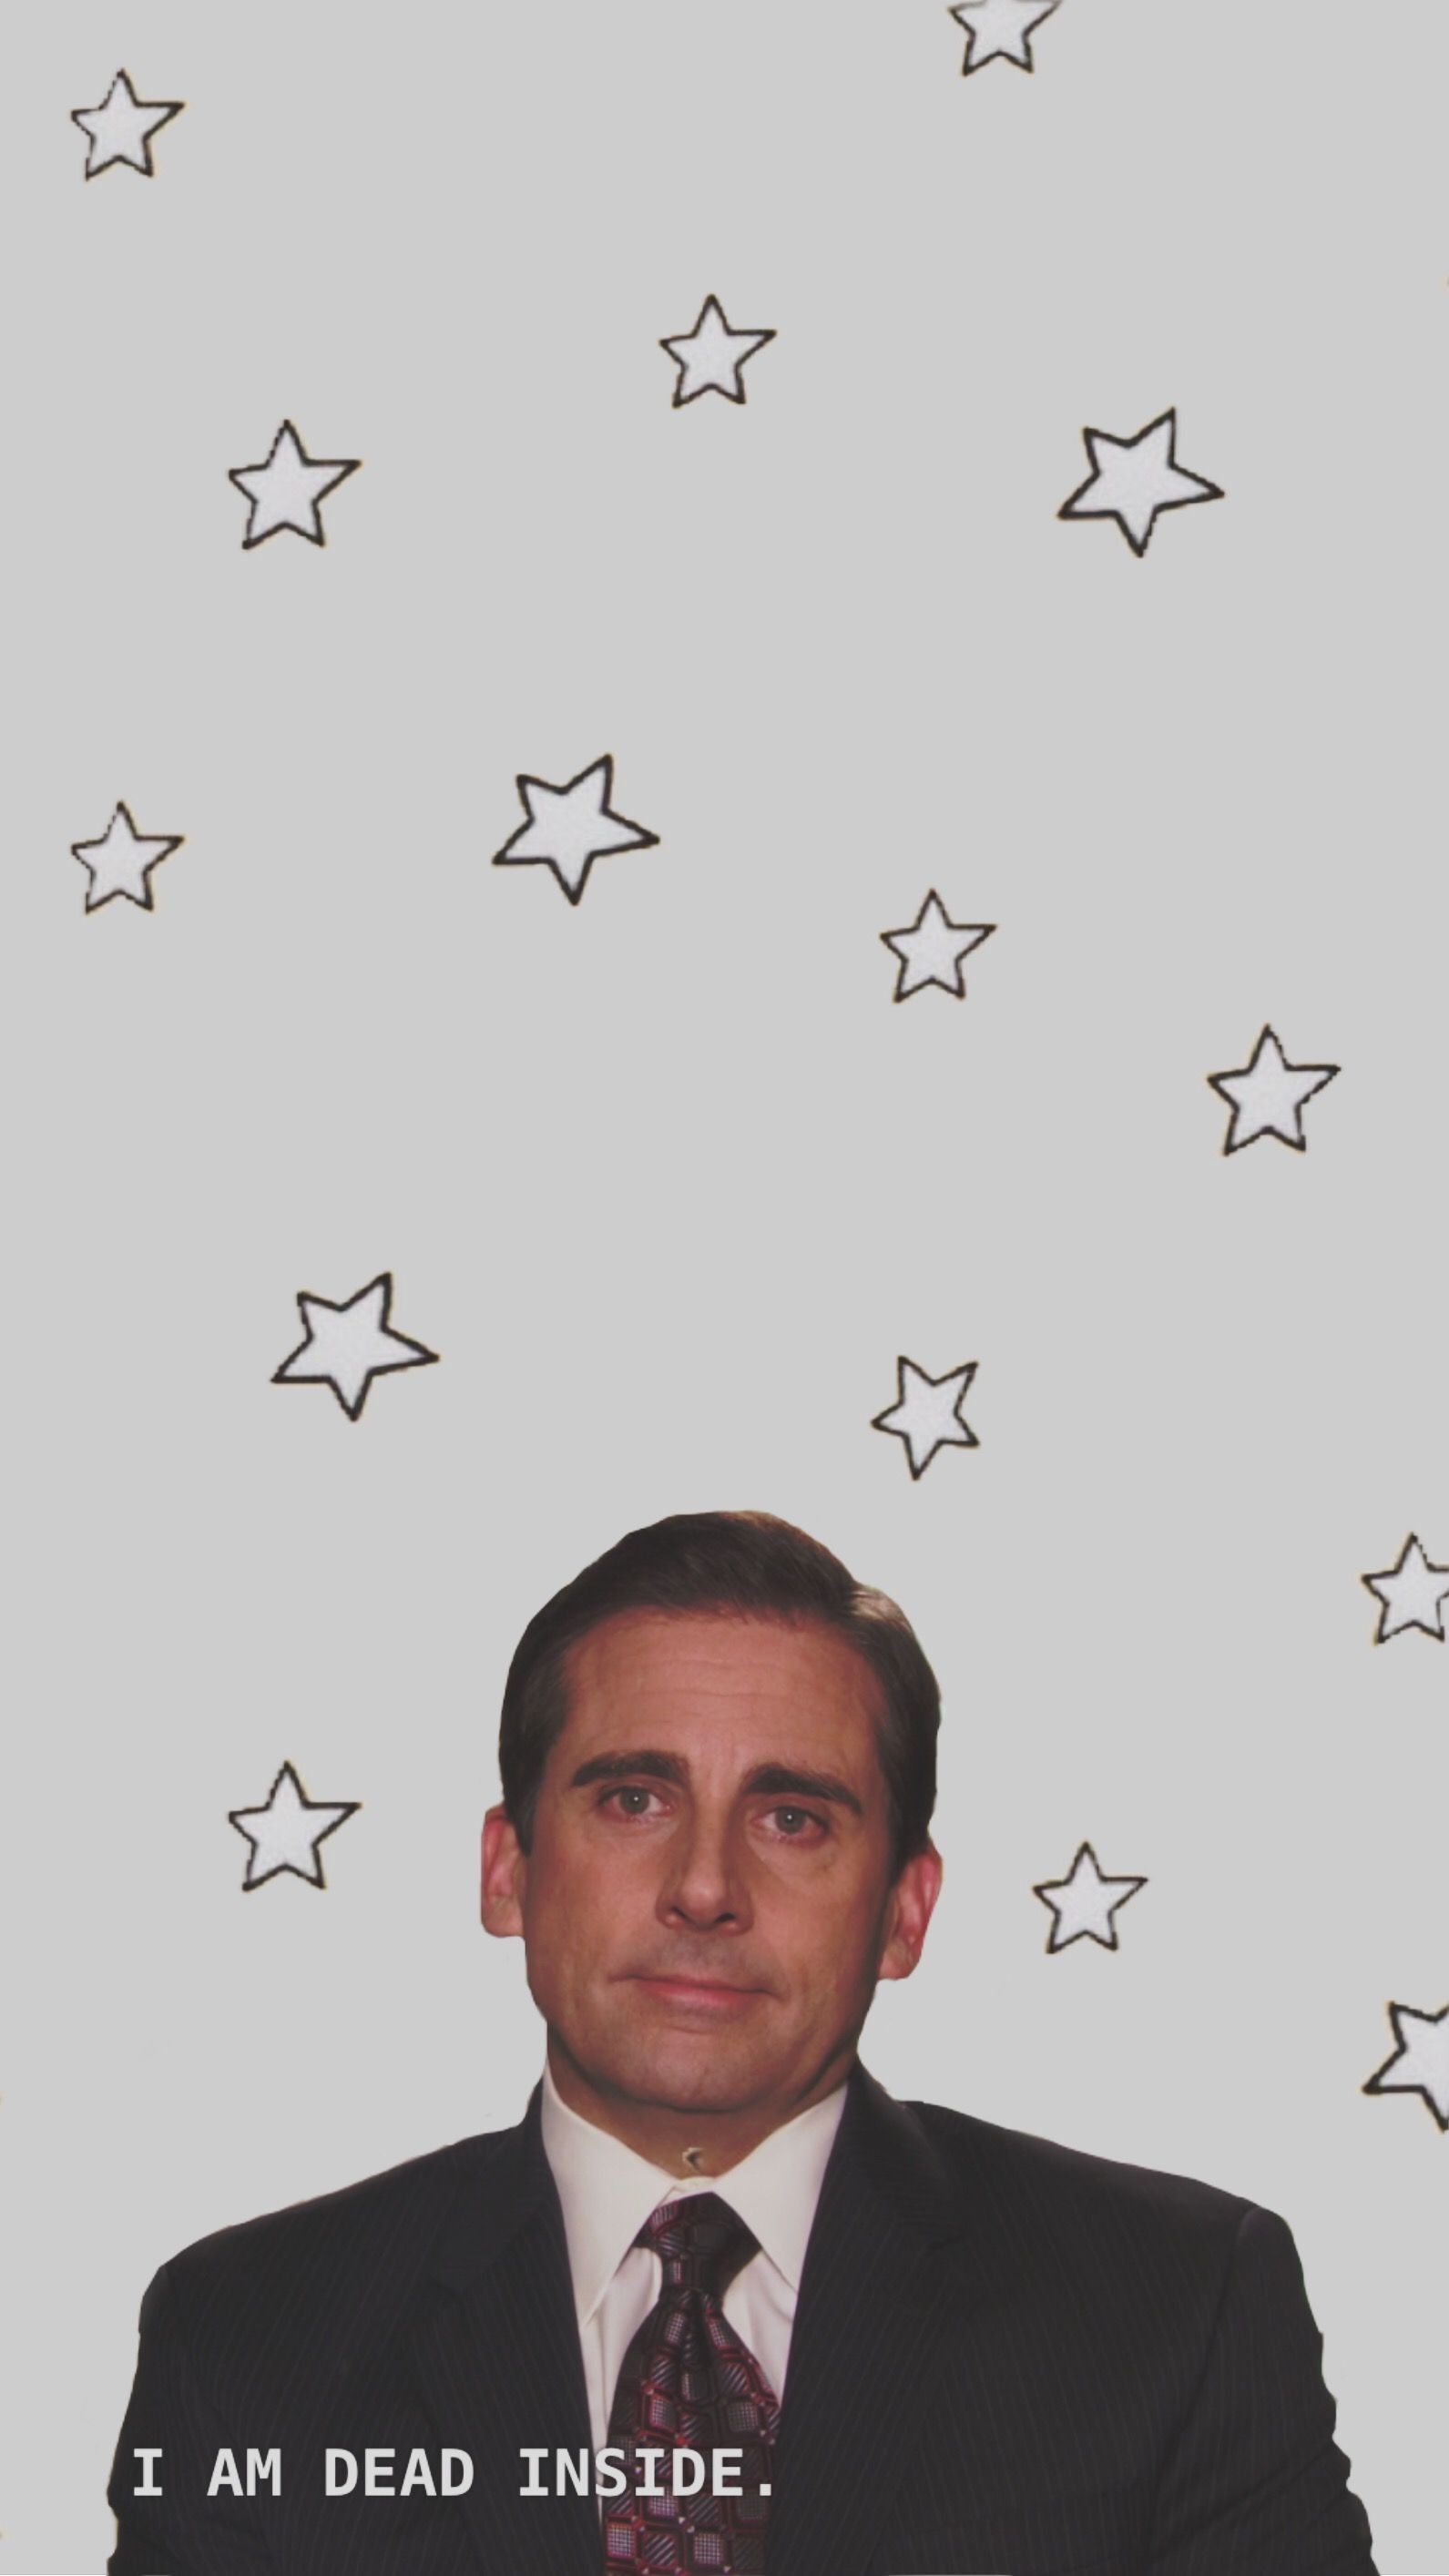 Aesthetic wallpaper of Michael Scott from The Office with a quote from the show 